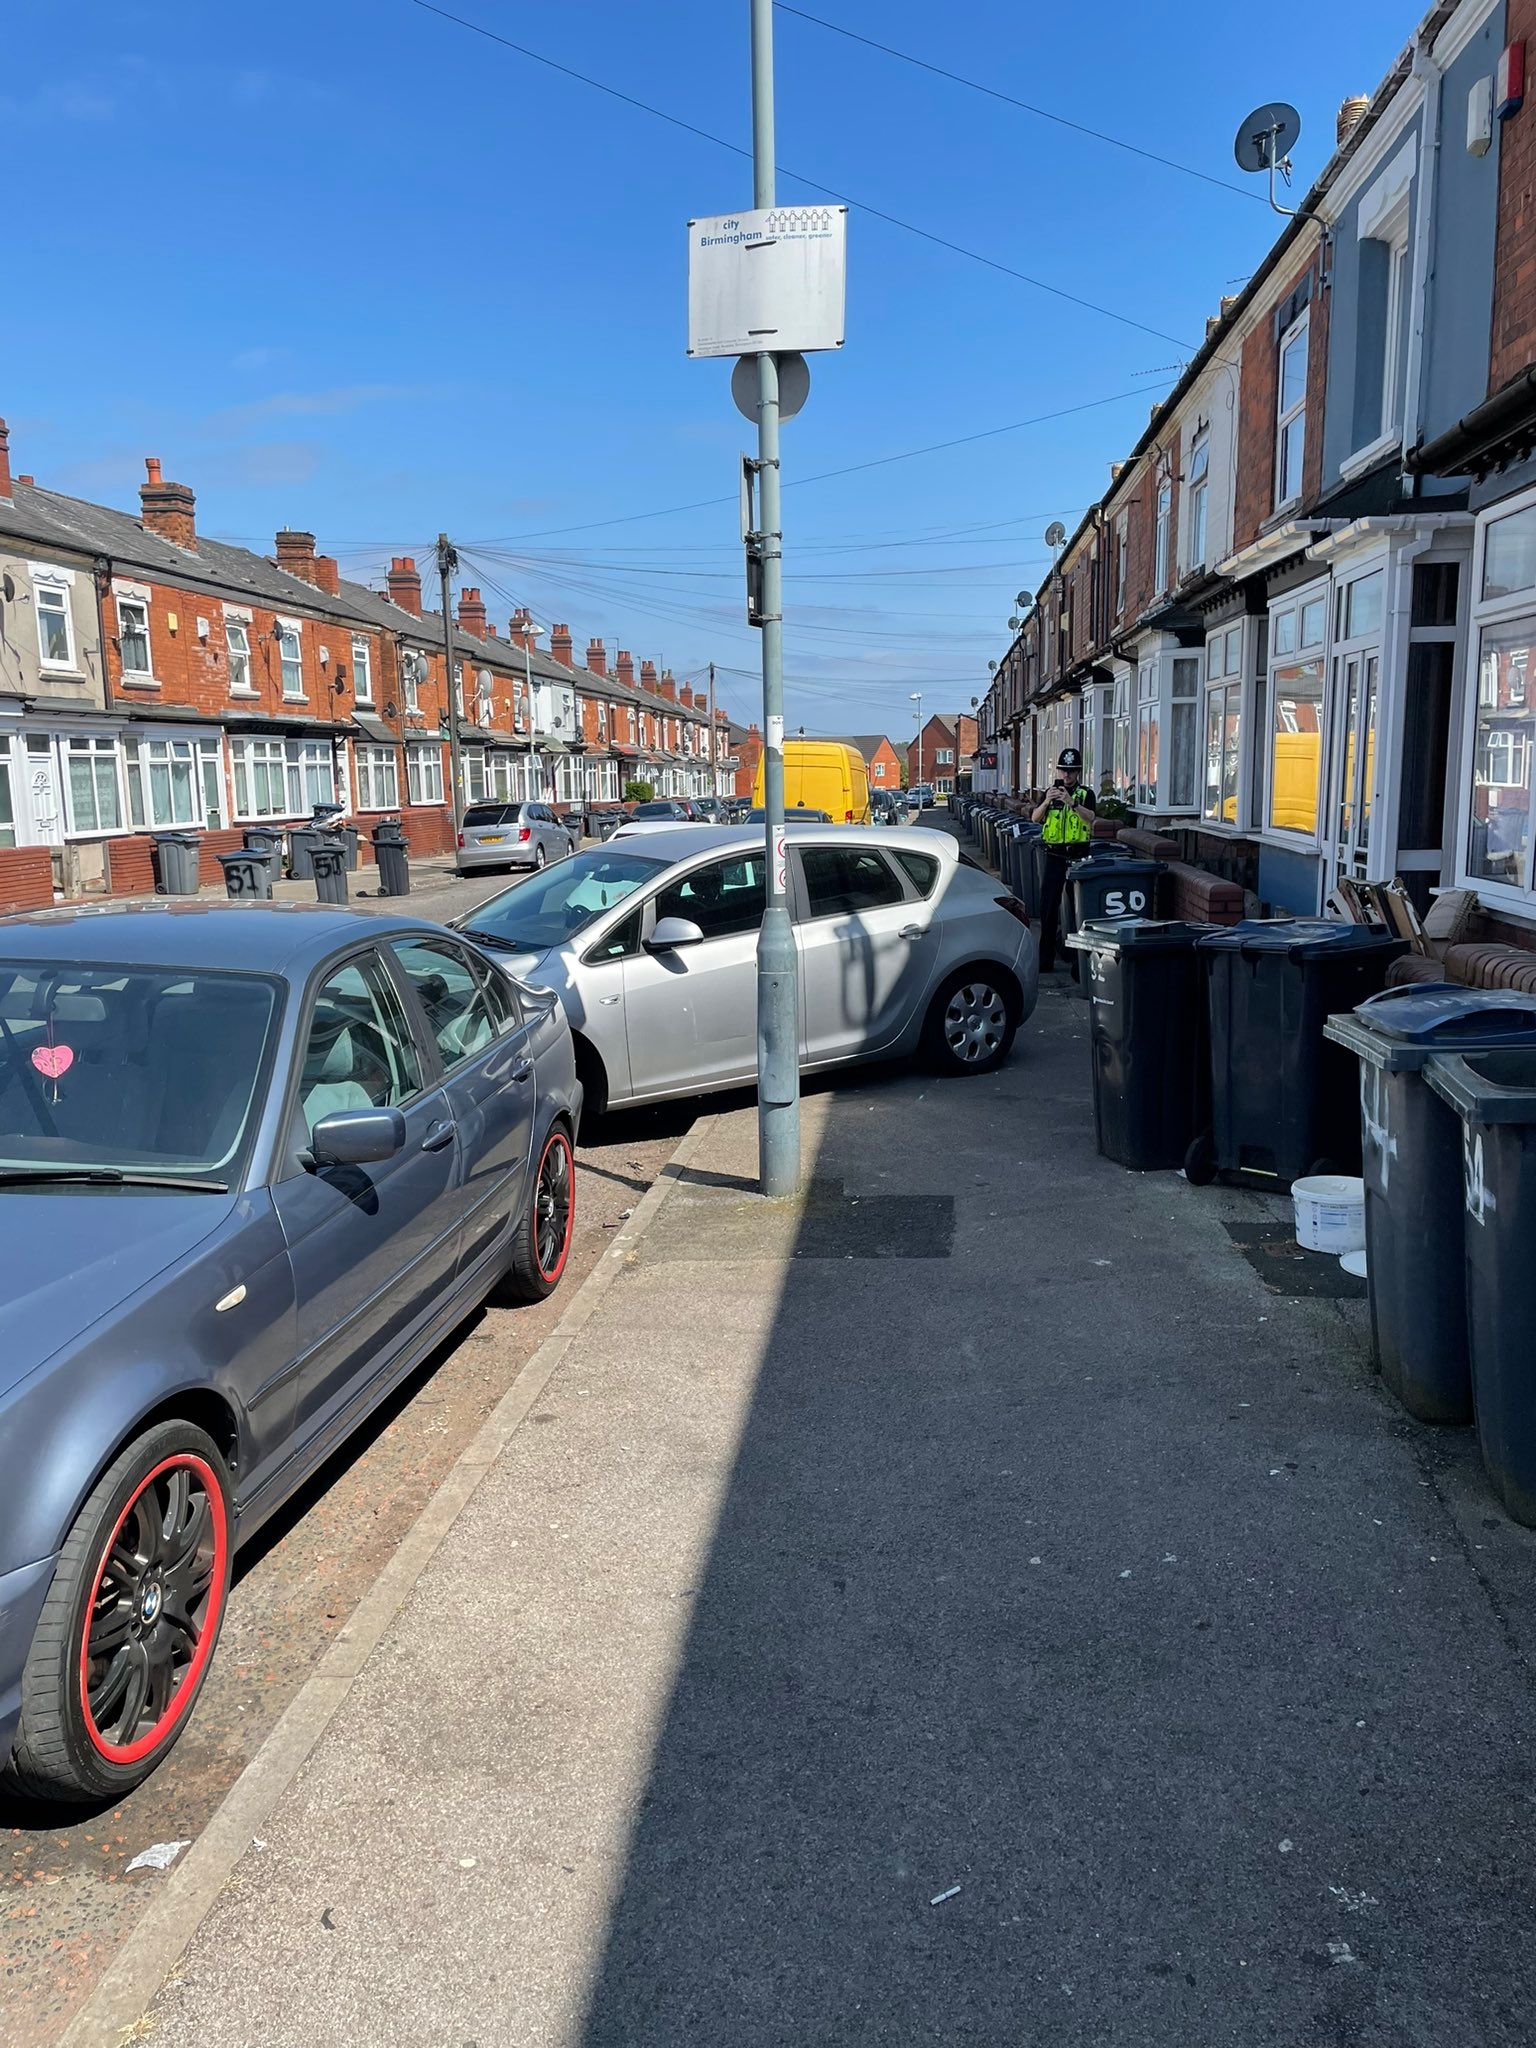 Police said this was the worst example of bad parking they saw on the day. Credit: Twitter/@SohoRoadWMP